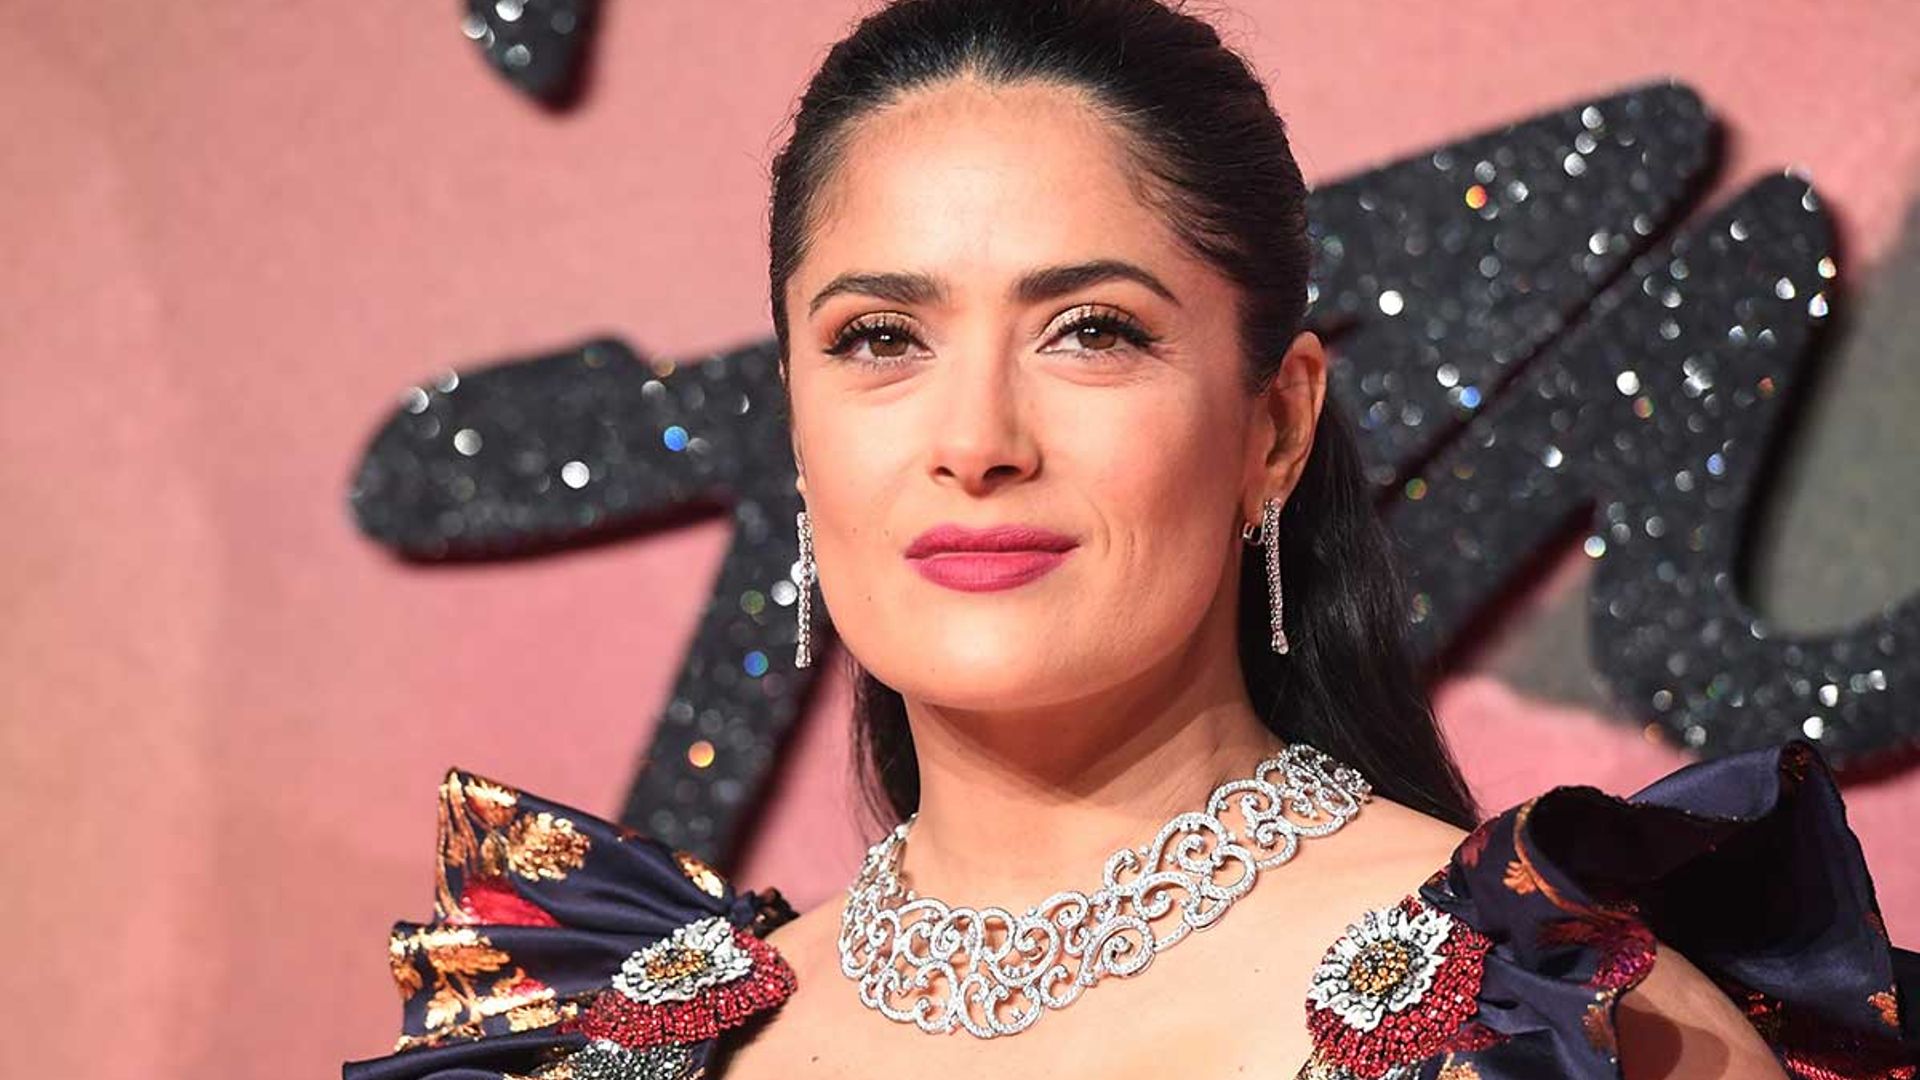 Salma Hayek and daughter Valentina invite fans inside stylish home in personal family video